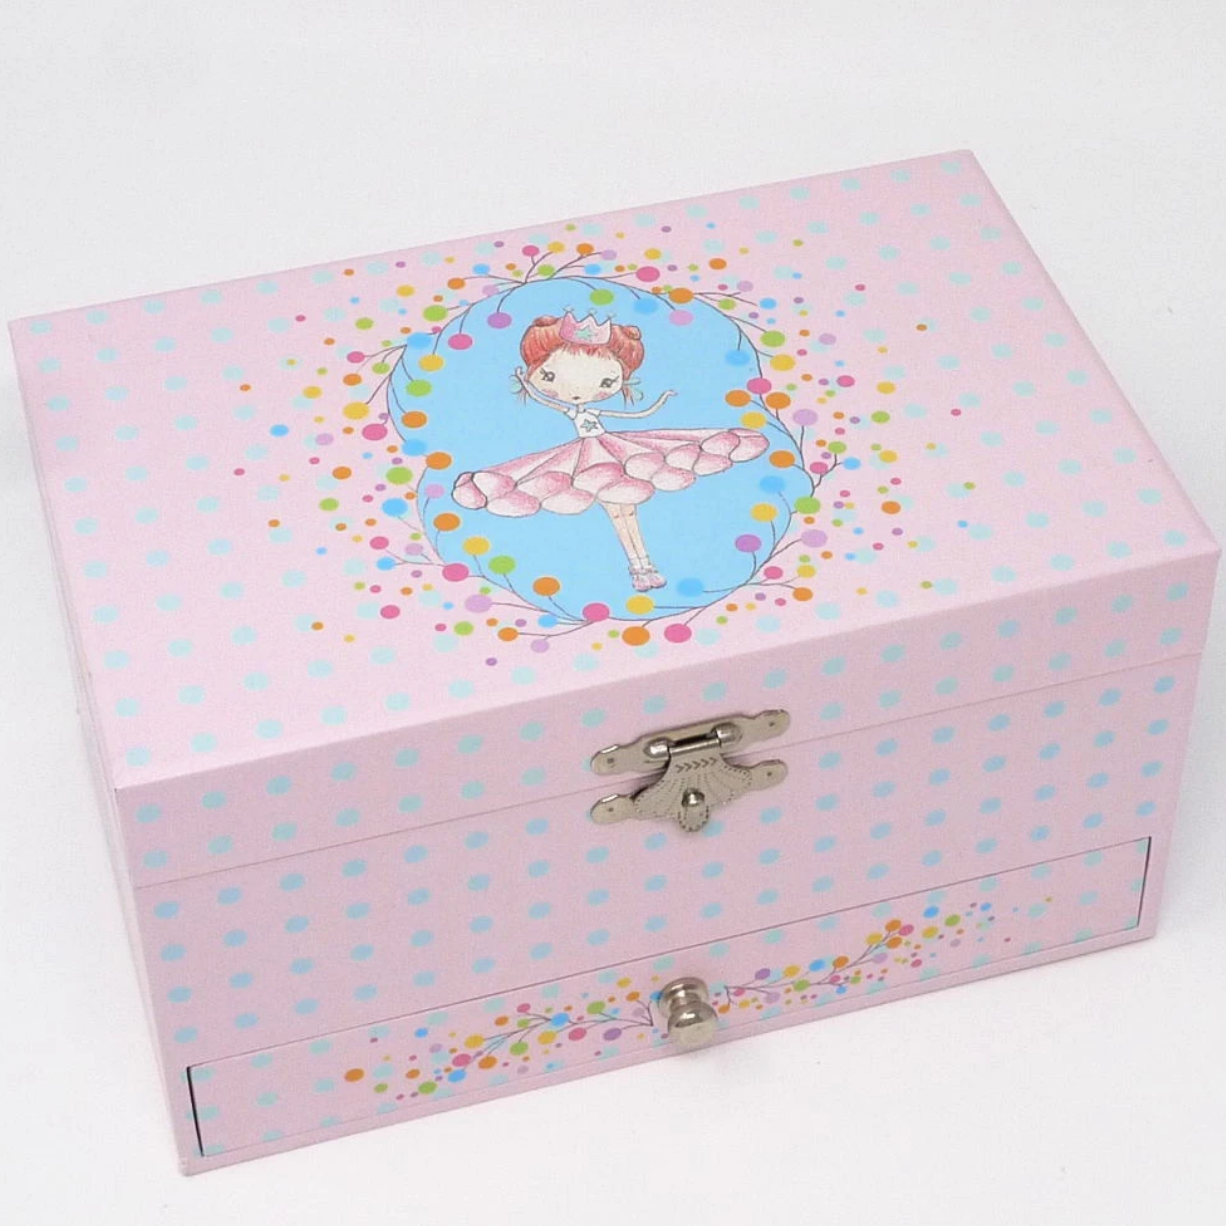 closed  box with illustration of ballerina on top